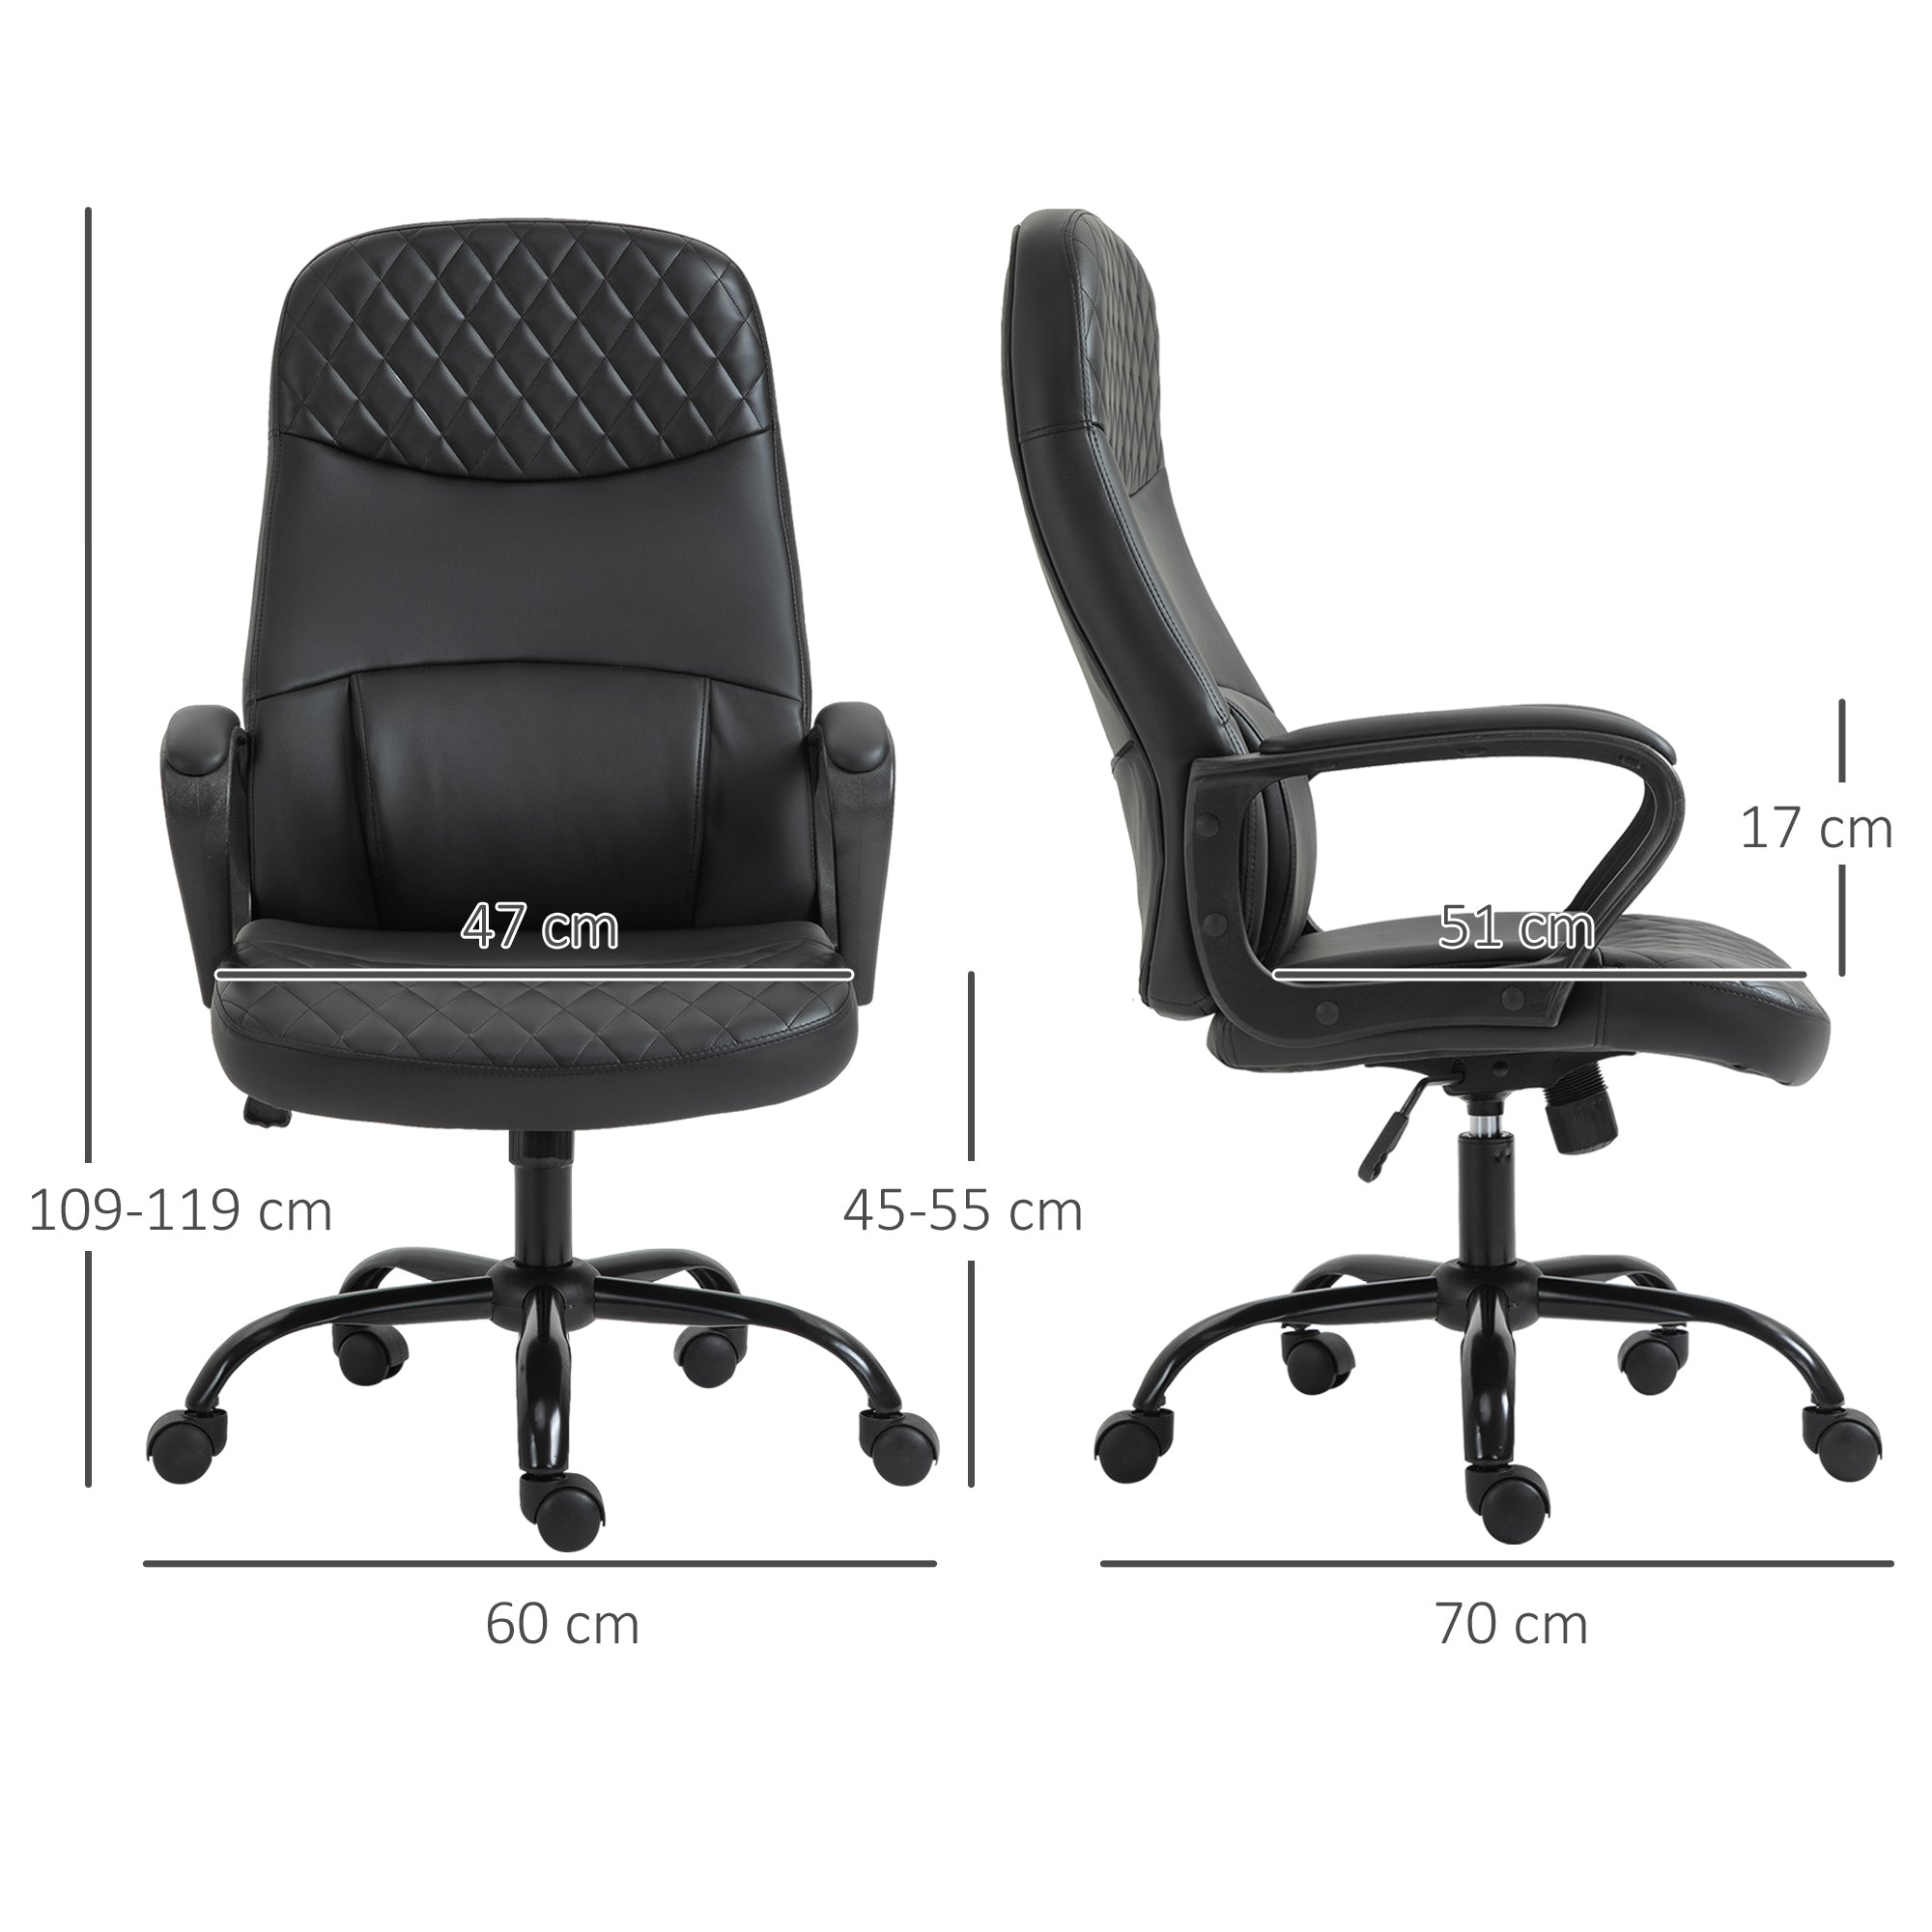 High Back Massage Office Chair with Armrest PU Leather Vibration Executive Chair with Adjustable Height and Built-in Lumbar Support Black-2